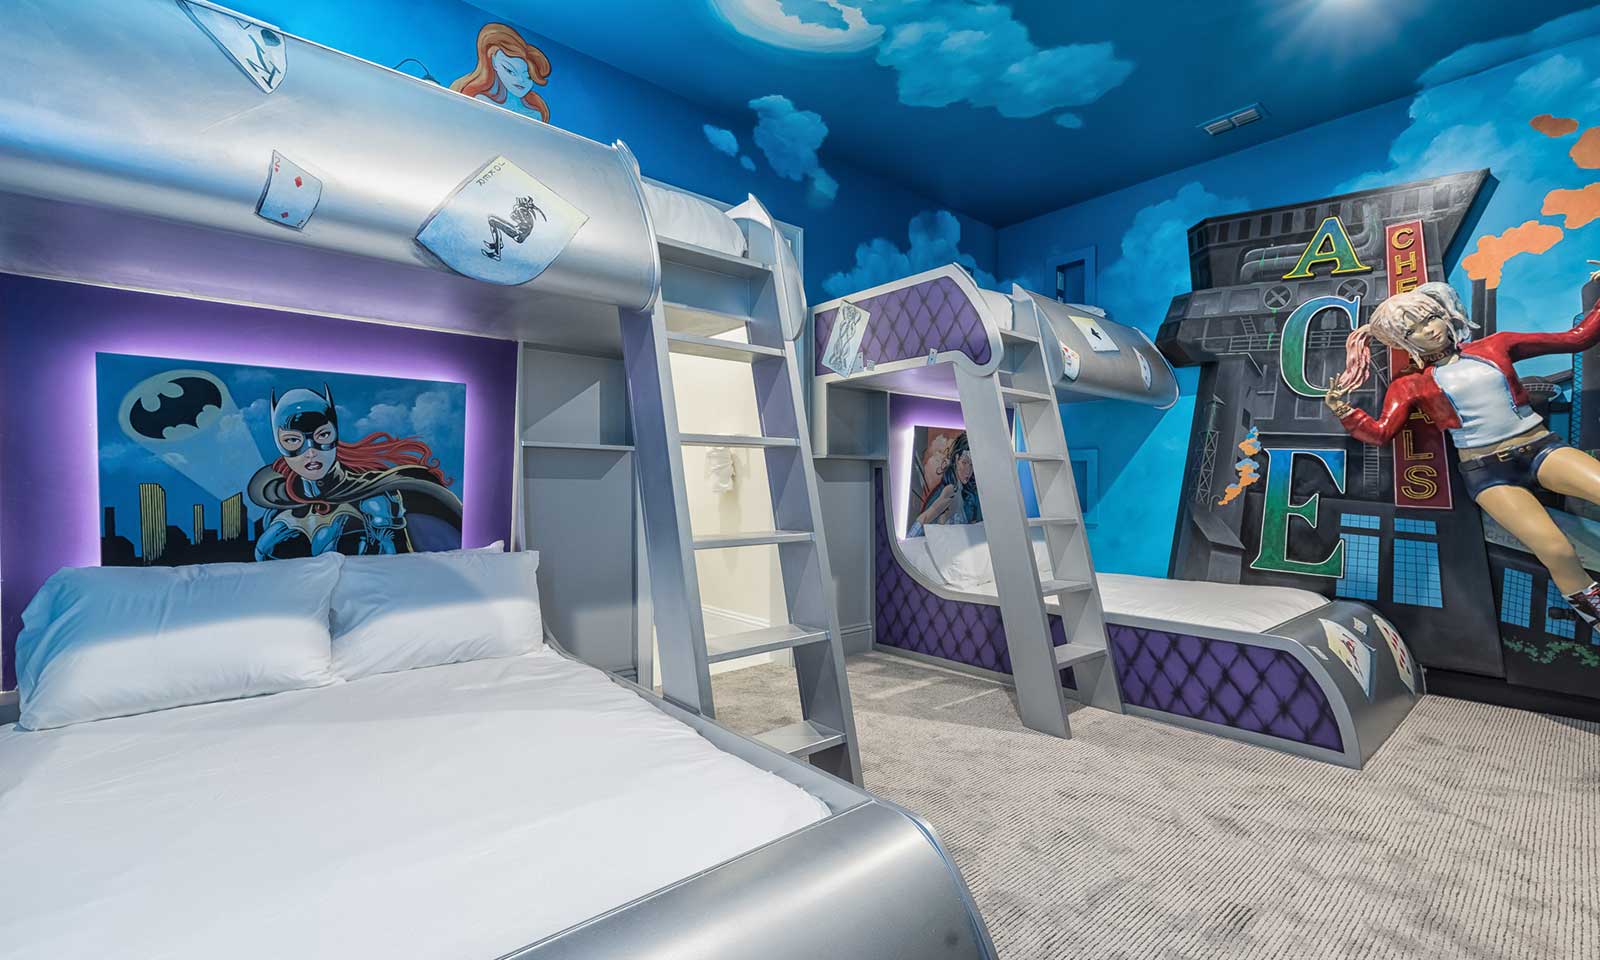 [amenities:Themed-Bedrooms:2] Themed Bedrooms